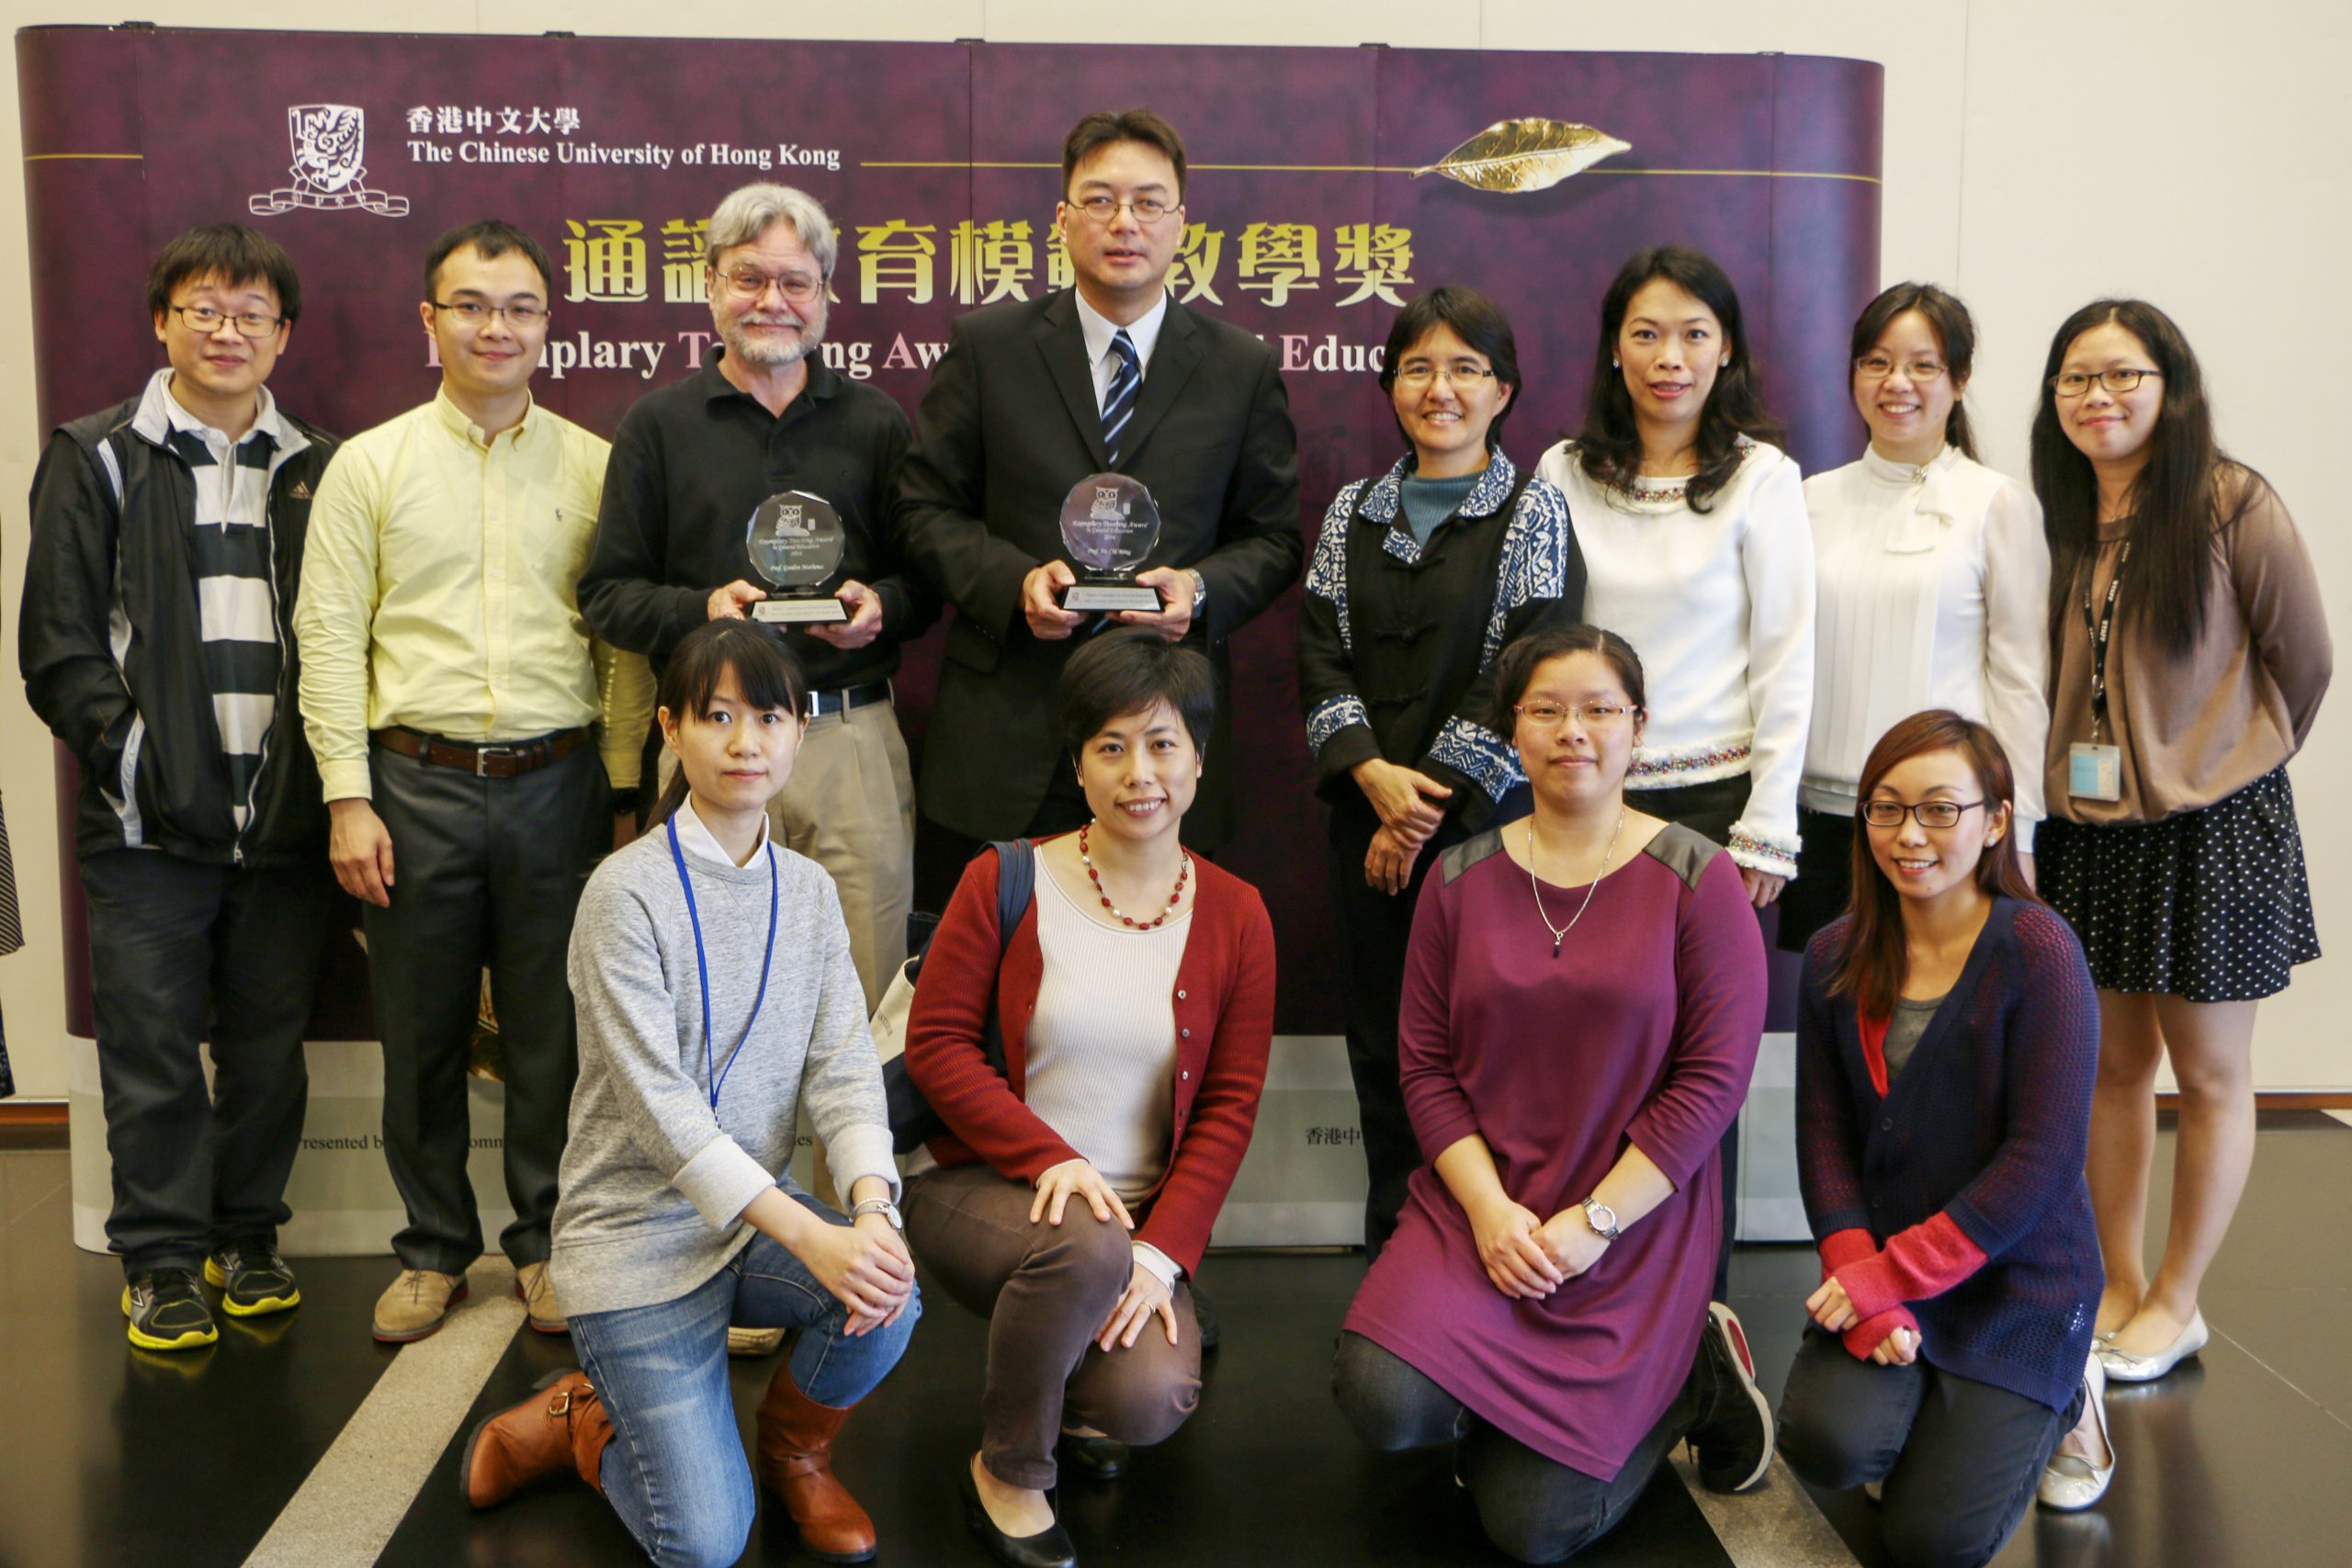 Professor Gordon Mathews,  Professor Ho Chi Ming and colleagues of Office of University General Education